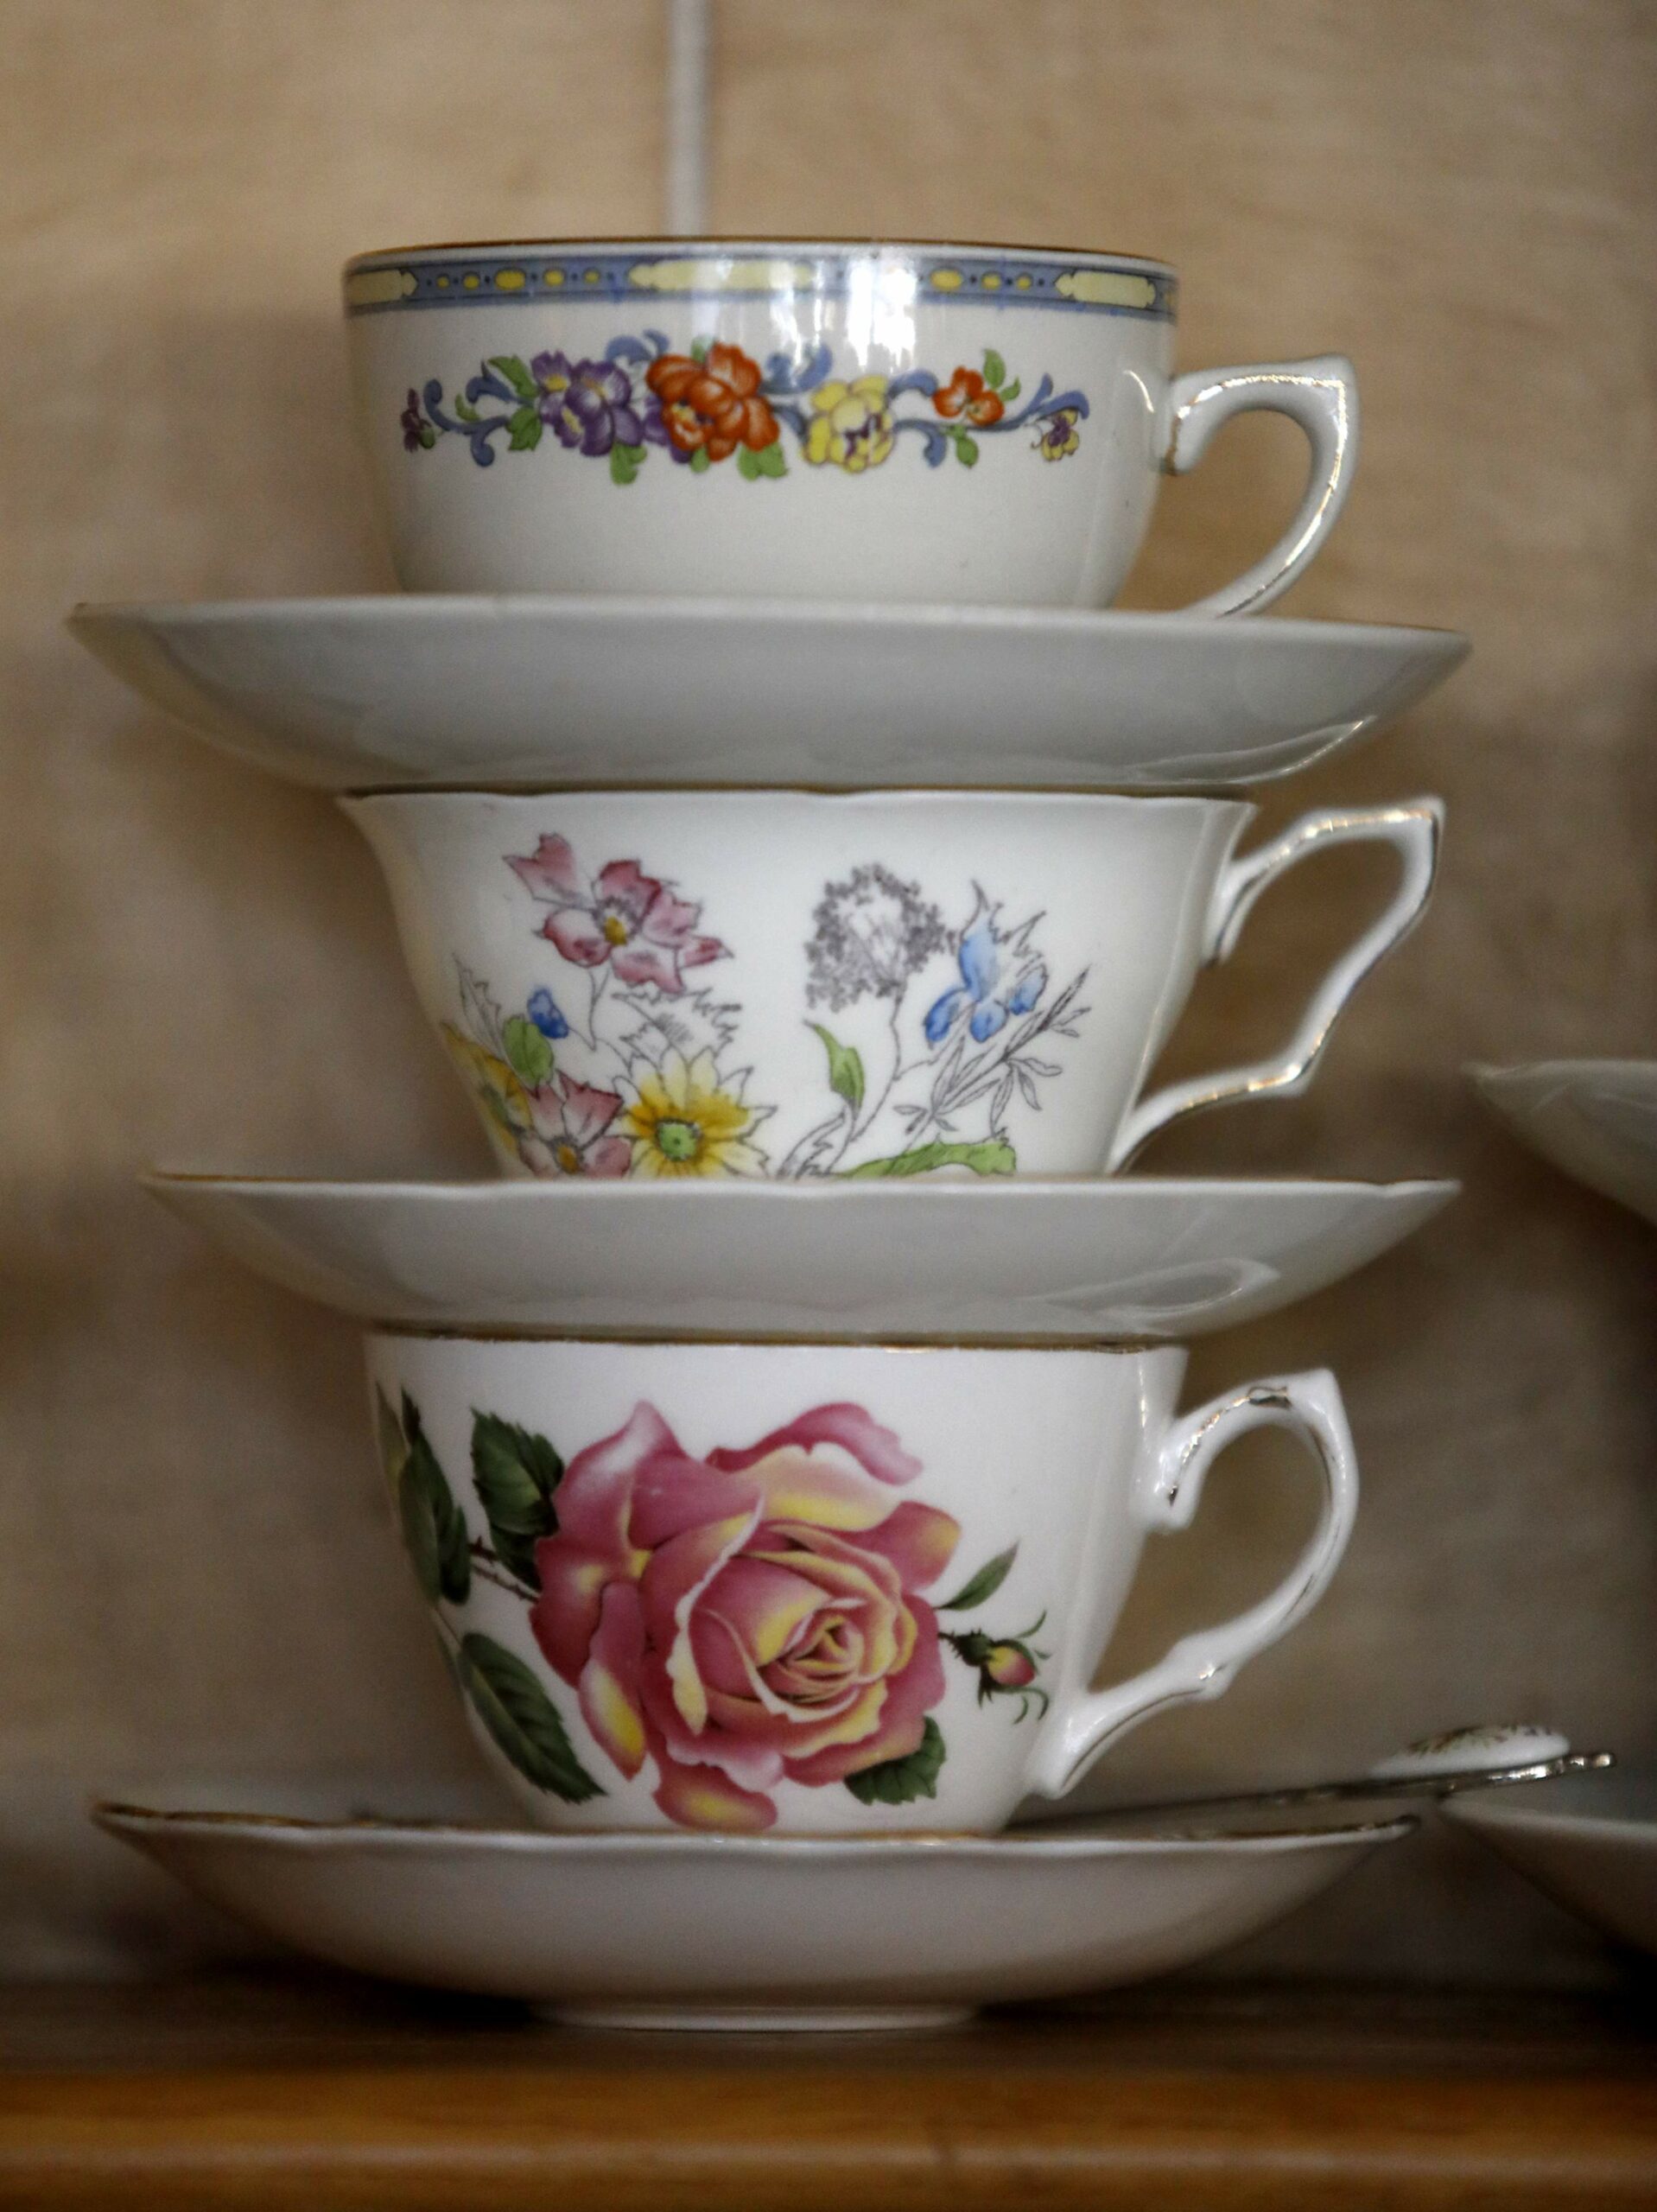 Teacups on a shelf during a Mary Poppins Holiday Tea Party at The Tudor Rose English Tea Room in Santa Rosa, on Sunday, December 17, 2017. (BETH SCHLANKER/ The Press Democrat)